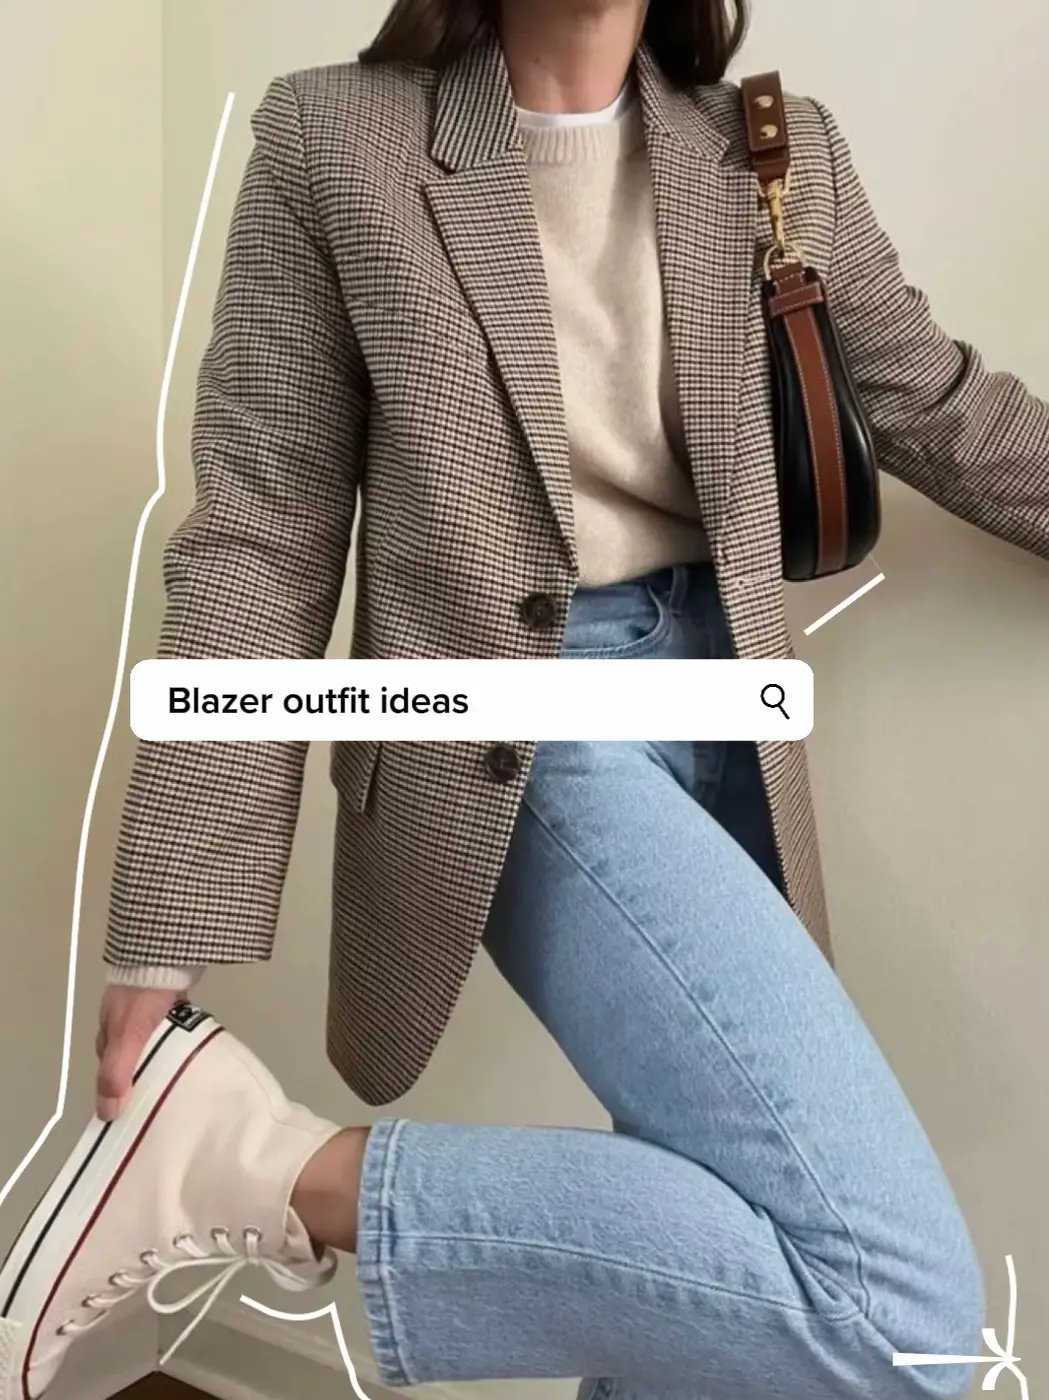 Putting Me Together - Style Help for the Everyday Woman  Plaid blazer,  Blazer outfits for women, Plaid blazer outfit